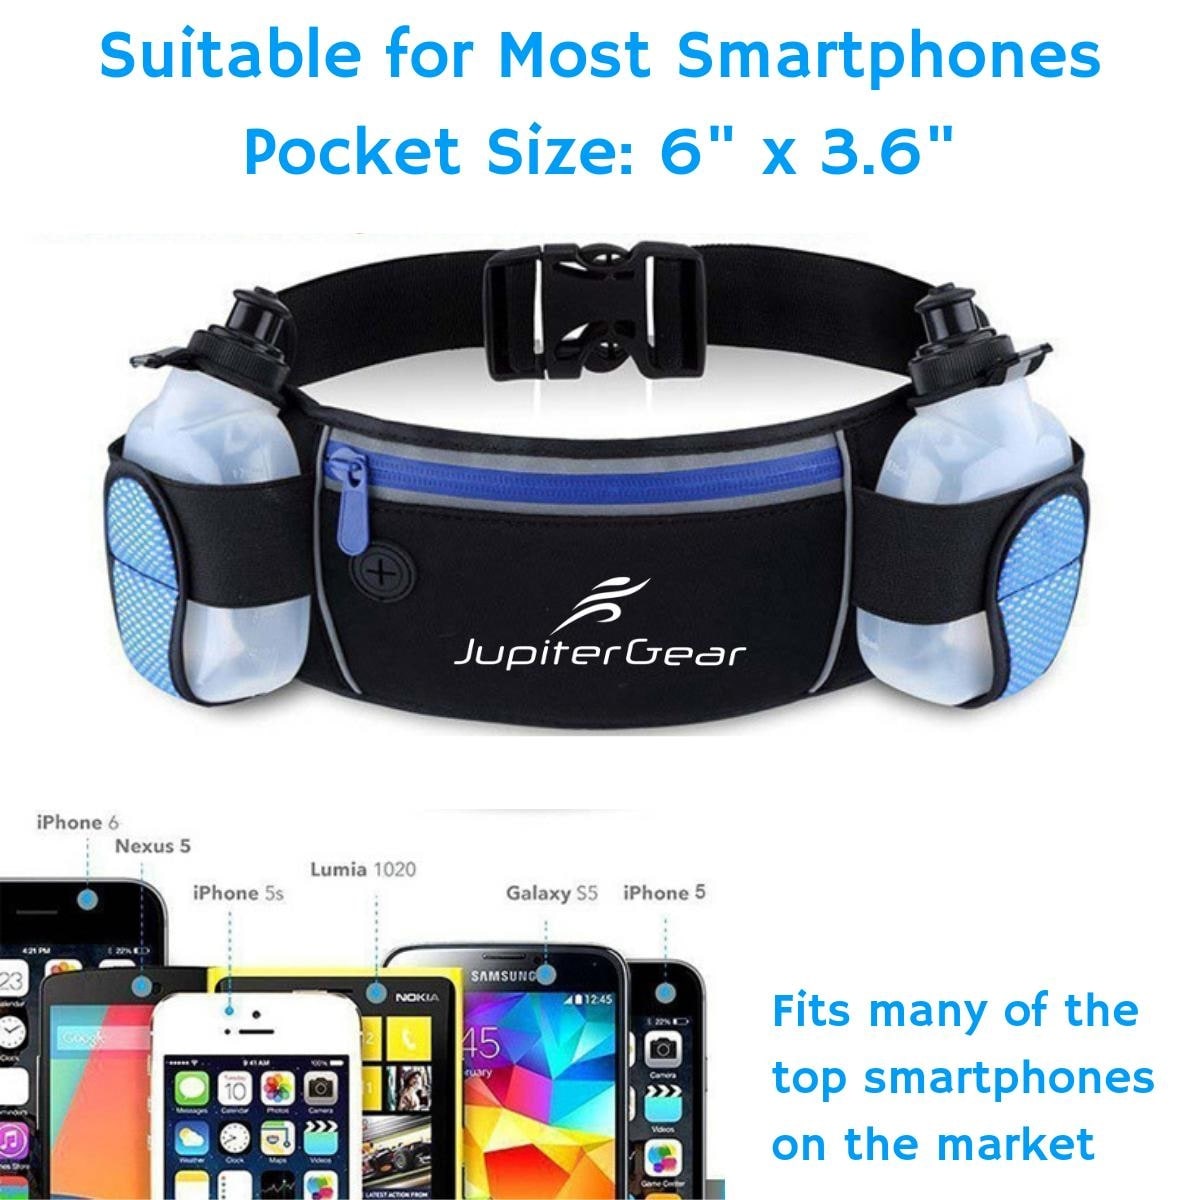 No-Bounce Water-Resistant Adjustable One Size iPhone 6 7 8-Plus X Fits Large Phones Made in USA for Men and Women Venture Series SPIbelt Hydration Belt with 2 8oz-Water Bottles Expandable Pouch 